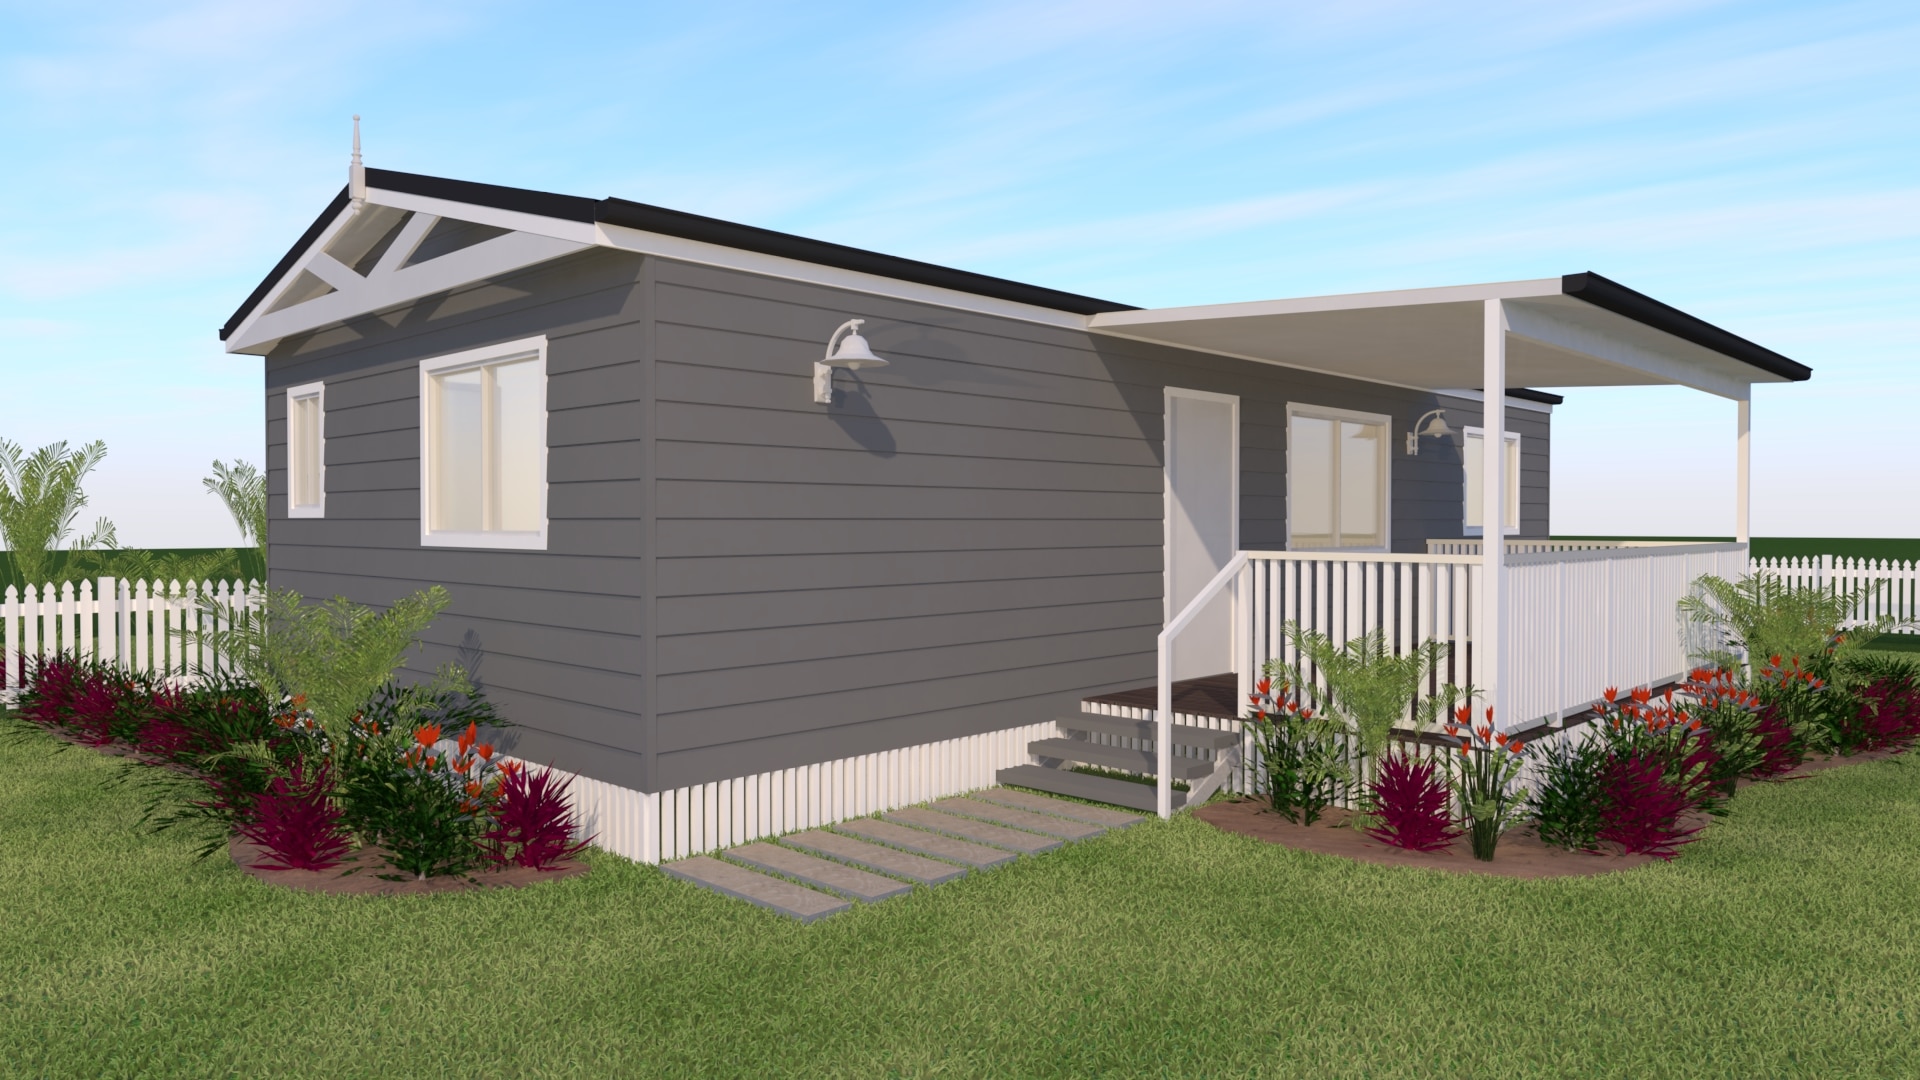 3d render of HOMElife Pods modular cabin 8 with side entrance and decking.